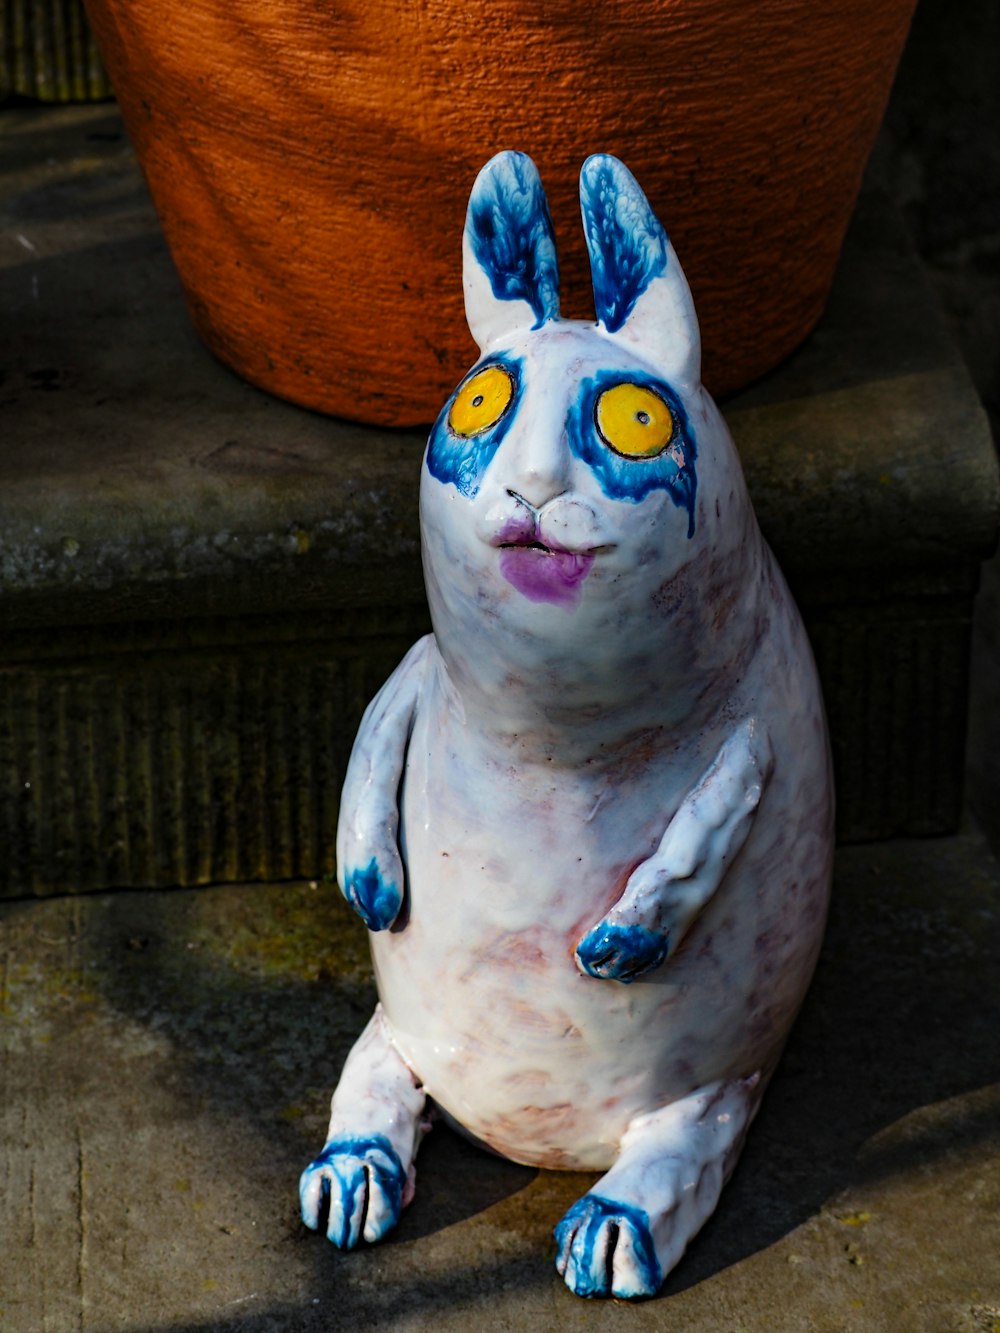 a statue of a cat with yellow eyes